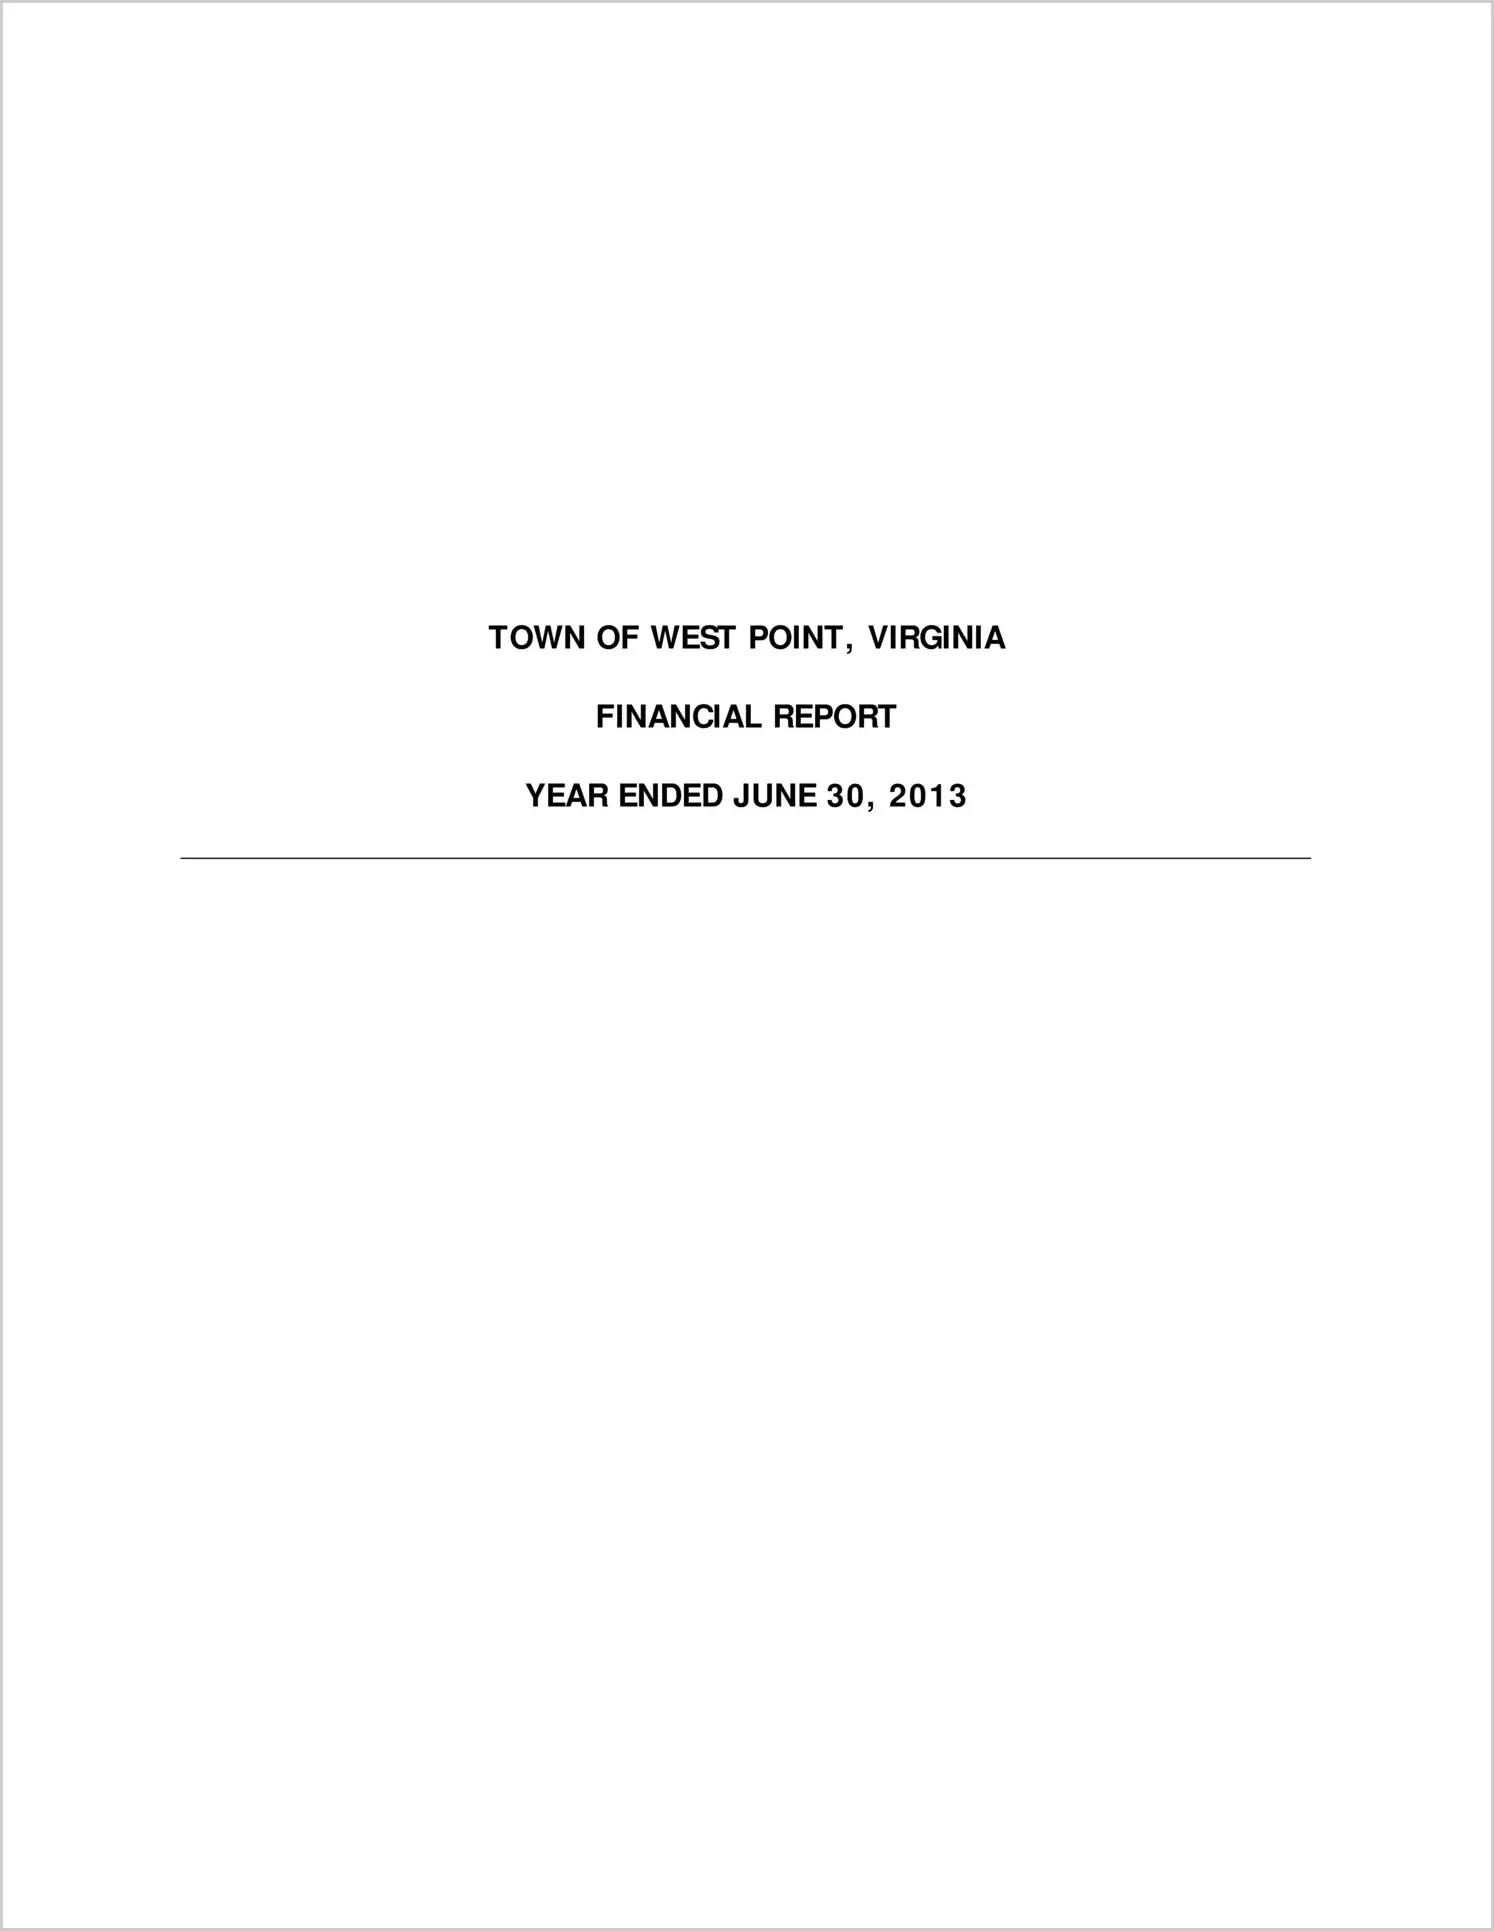 2013 Annual Financial Report for Town of West Point